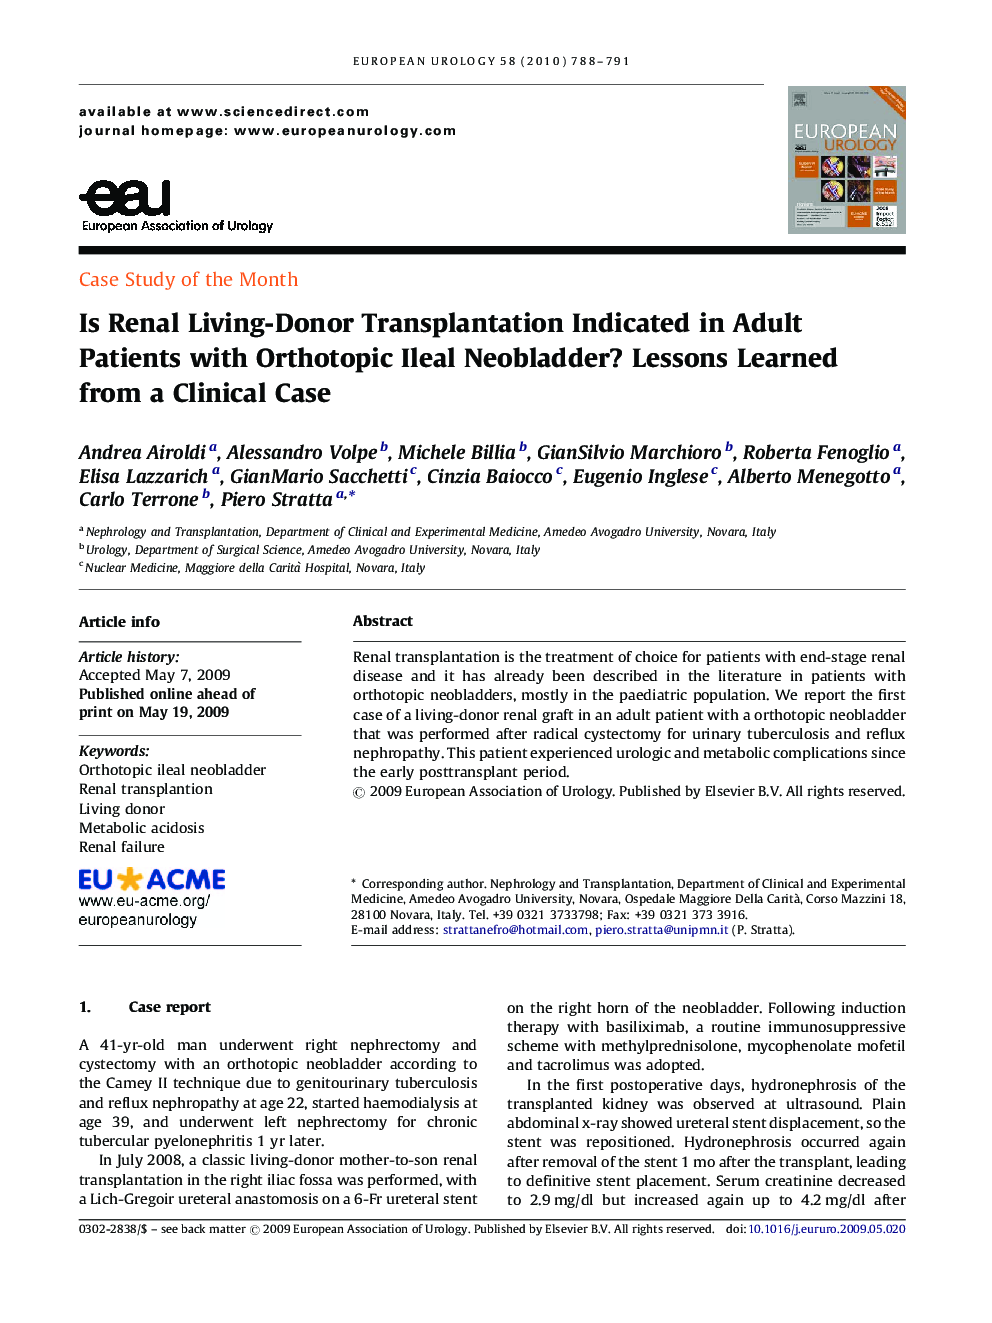 Is Renal Living-Donor Transplantation Indicated in Adult Patients with Orthotopic Ileal Neobladder? Lessons Learned from a Clinical Case